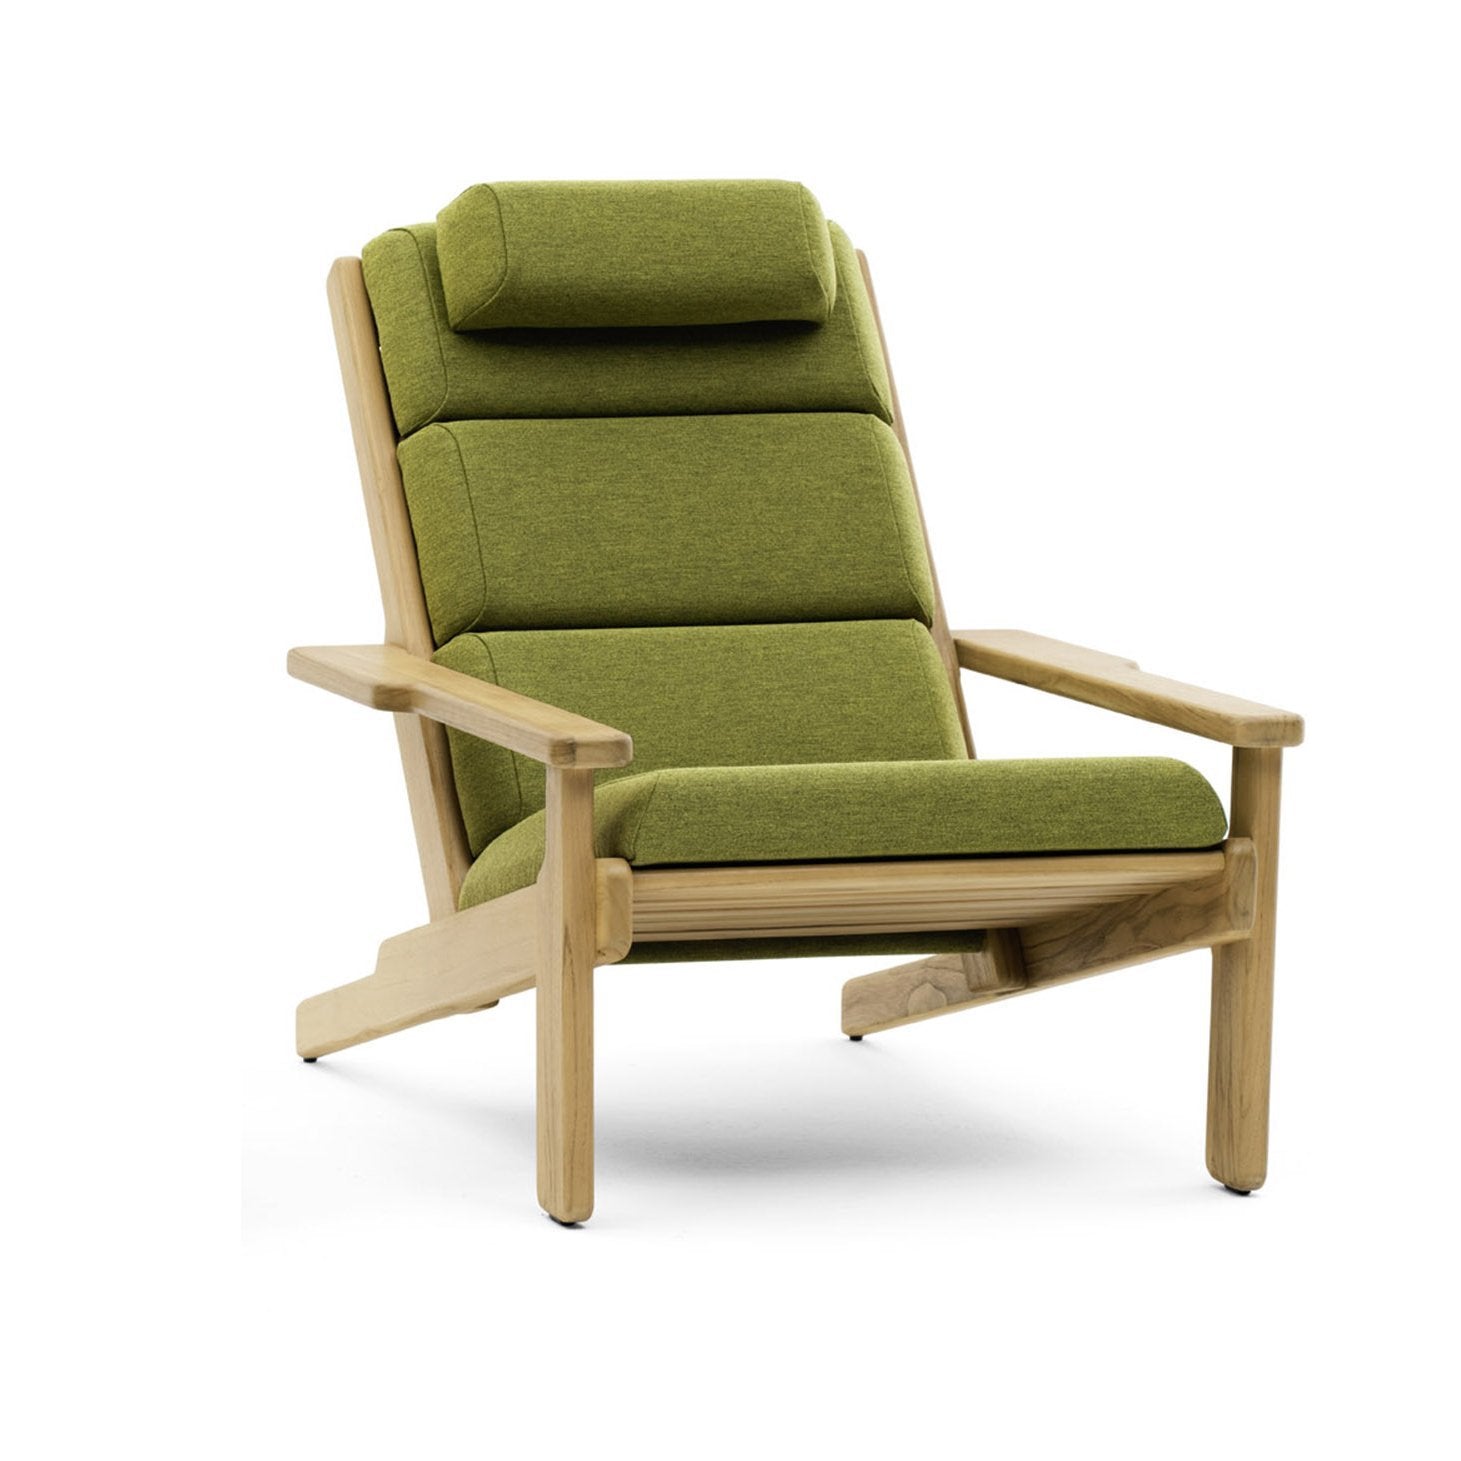 Bali Deck Chair from Varaschin -Contract Quality Outdoor Lounge Chair